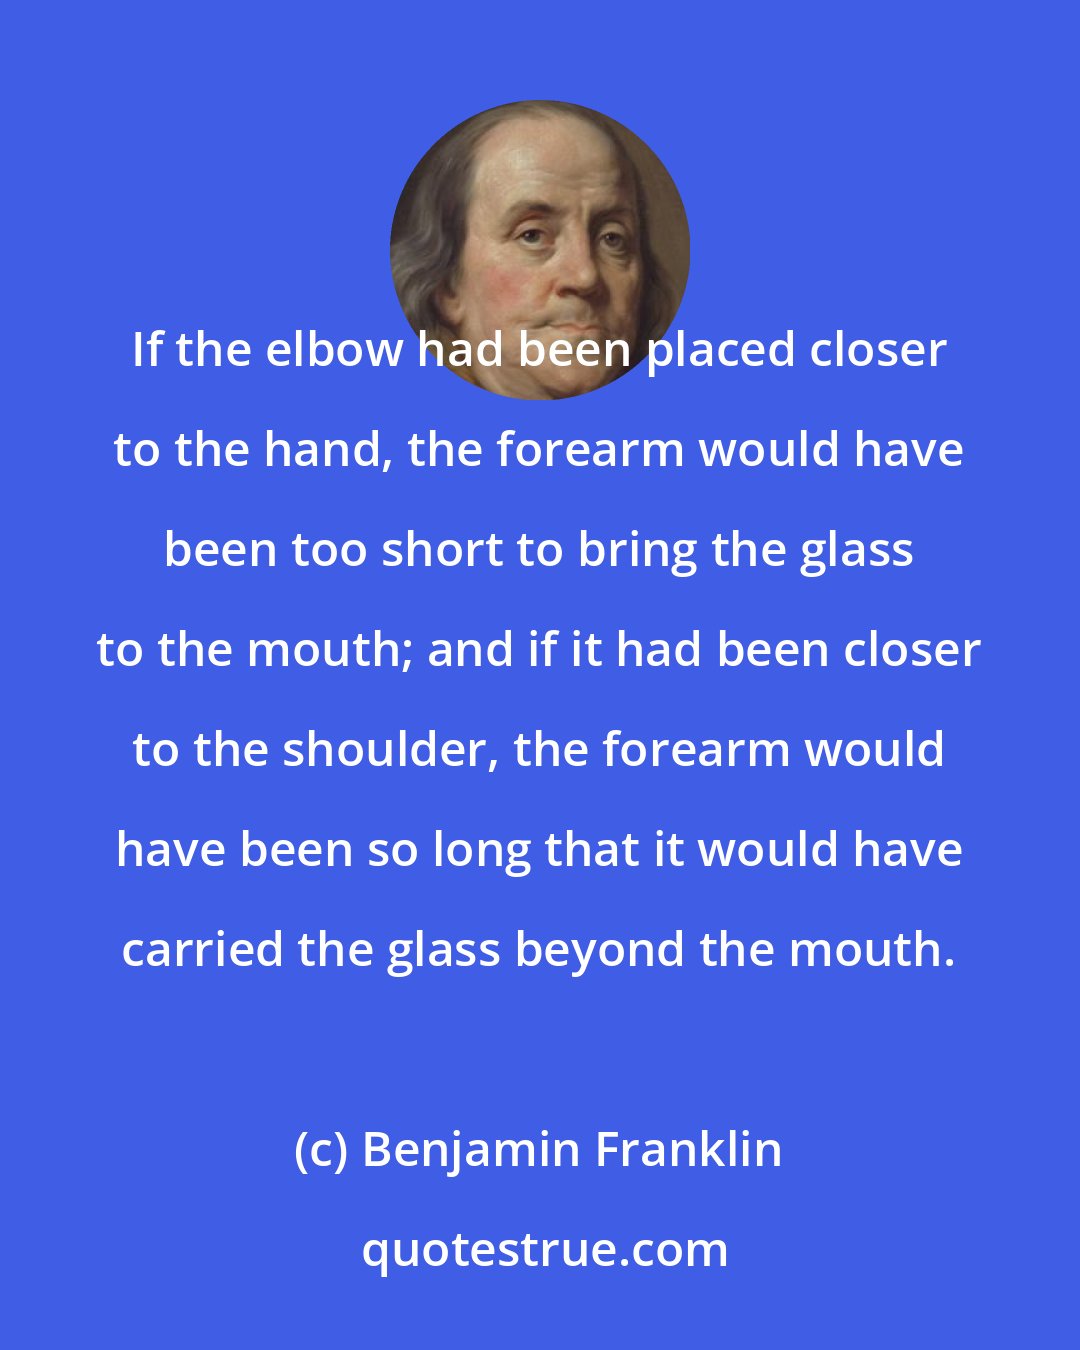 Benjamin Franklin: If the elbow had been placed closer to the hand, the forearm would have been too short to bring the glass to the mouth; and if it had been closer to the shoulder, the forearm would have been so long that it would have carried the glass beyond the mouth.